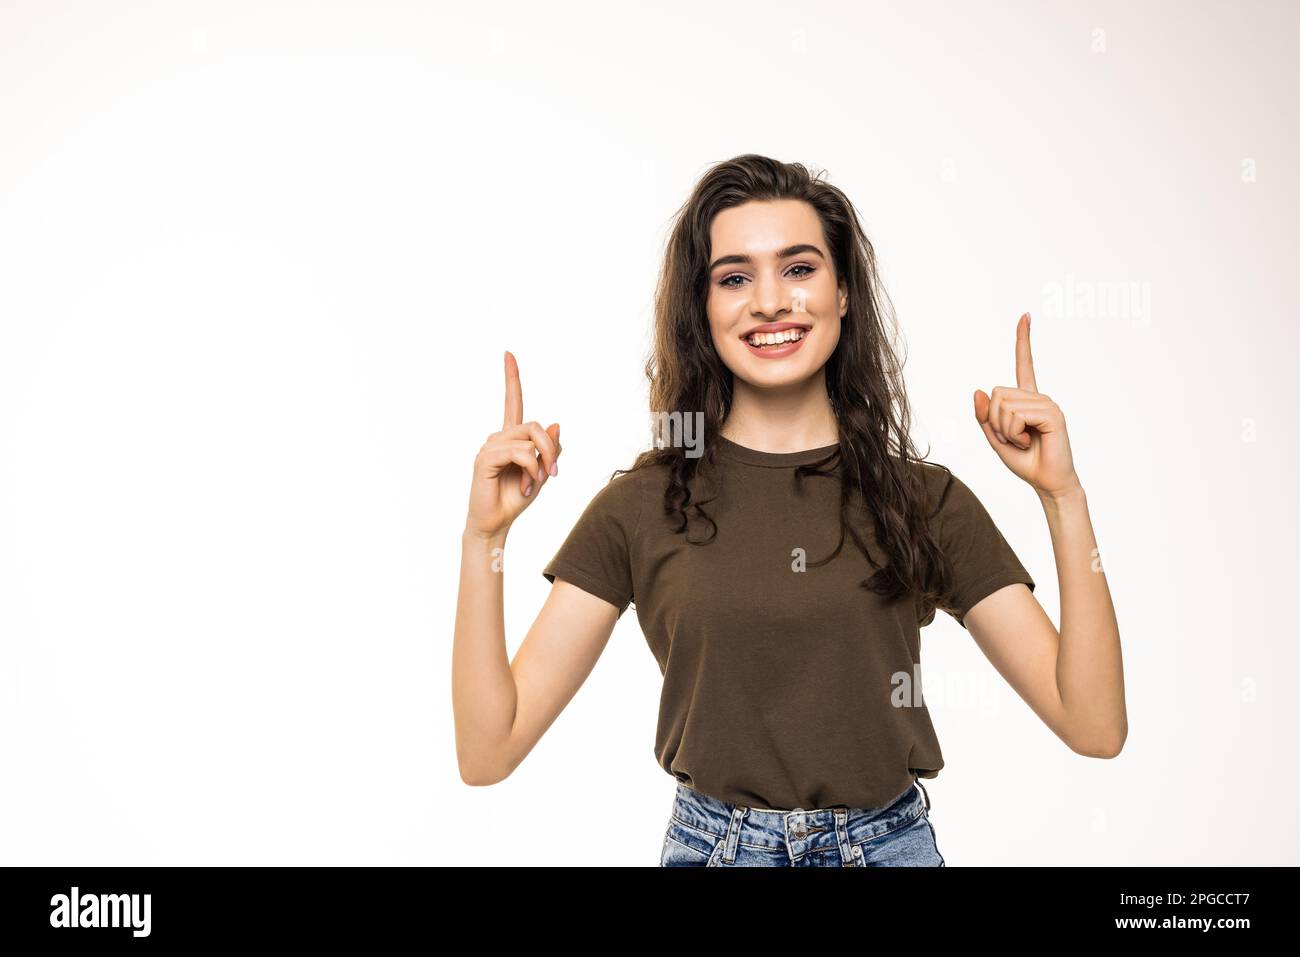 Thoughtful smiling woman with fair hair, raising finger and pointing up, having good point or idea, showing advertisement, standing against white back Stock Photo